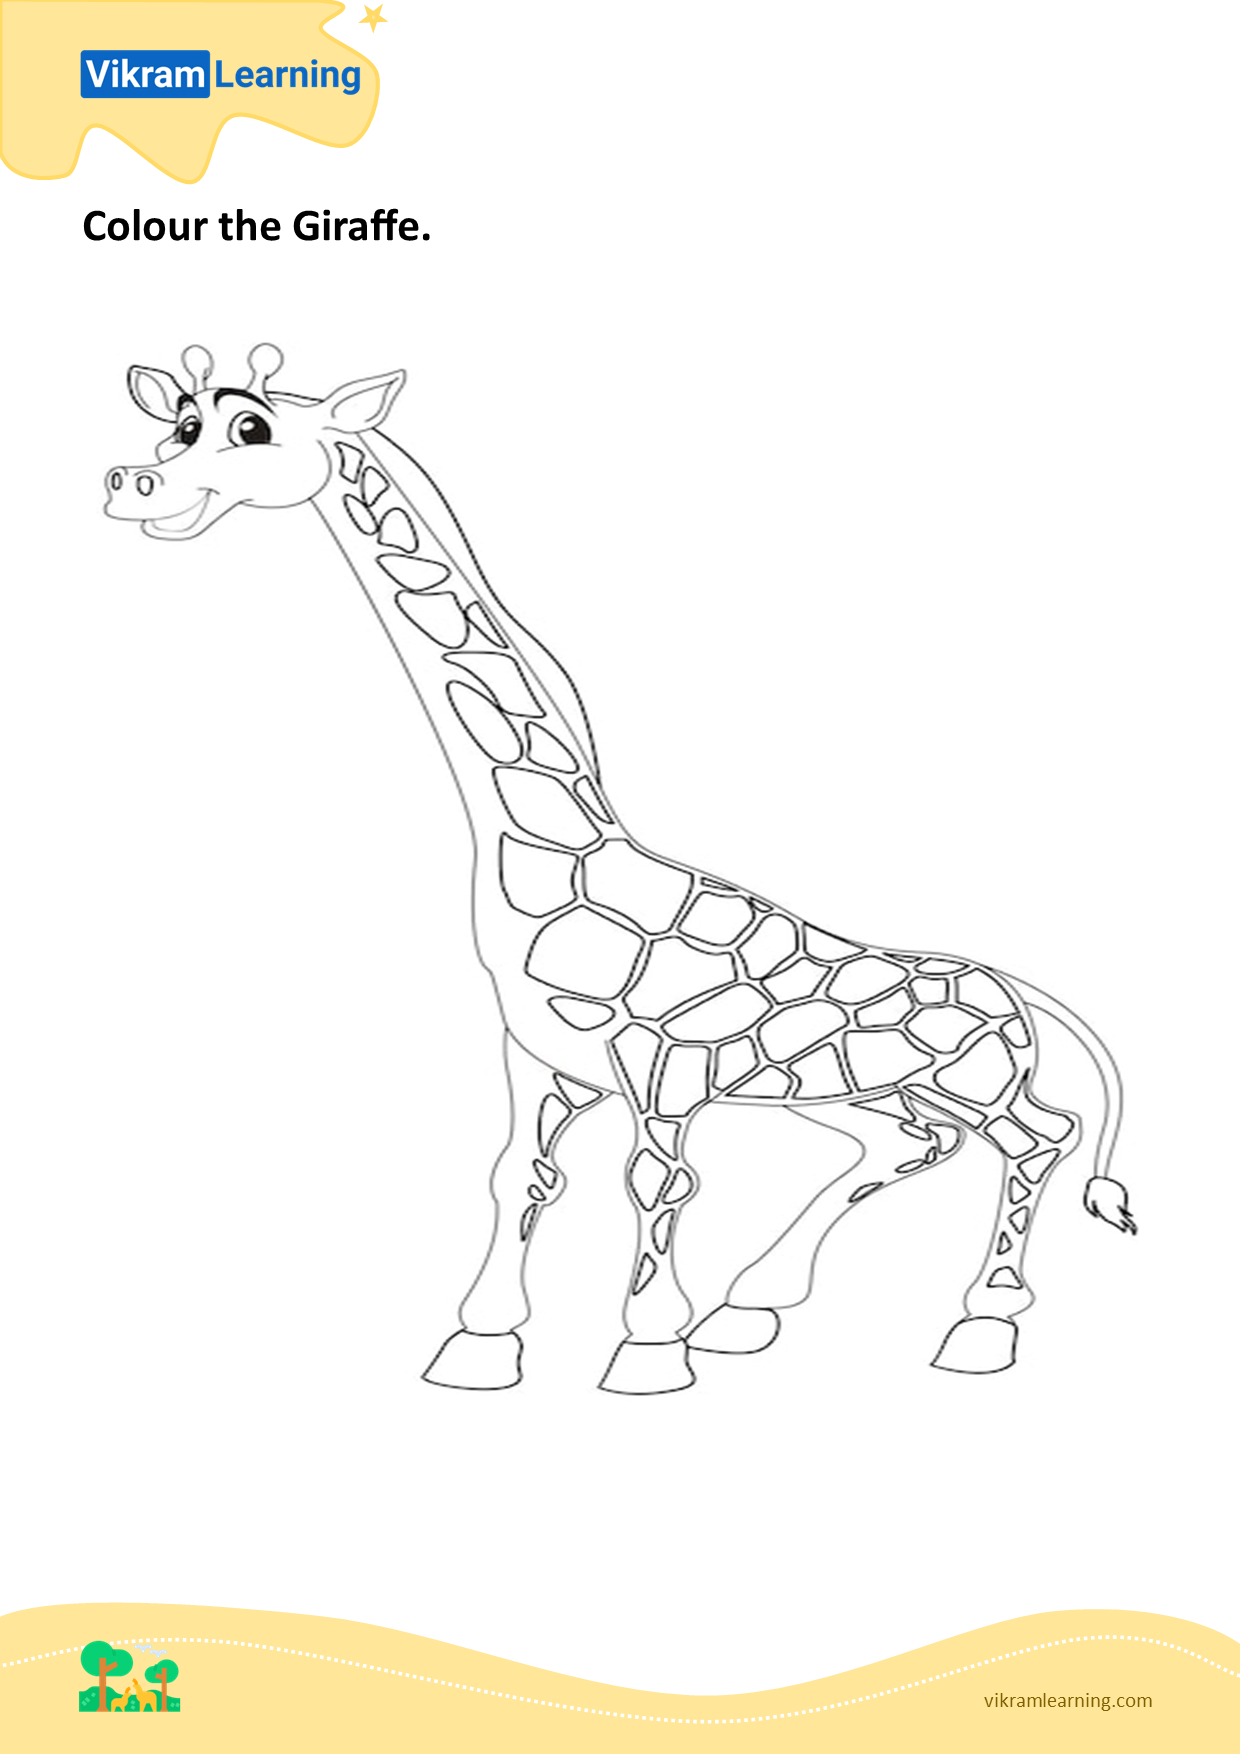 Download colour the giraffe worksheets